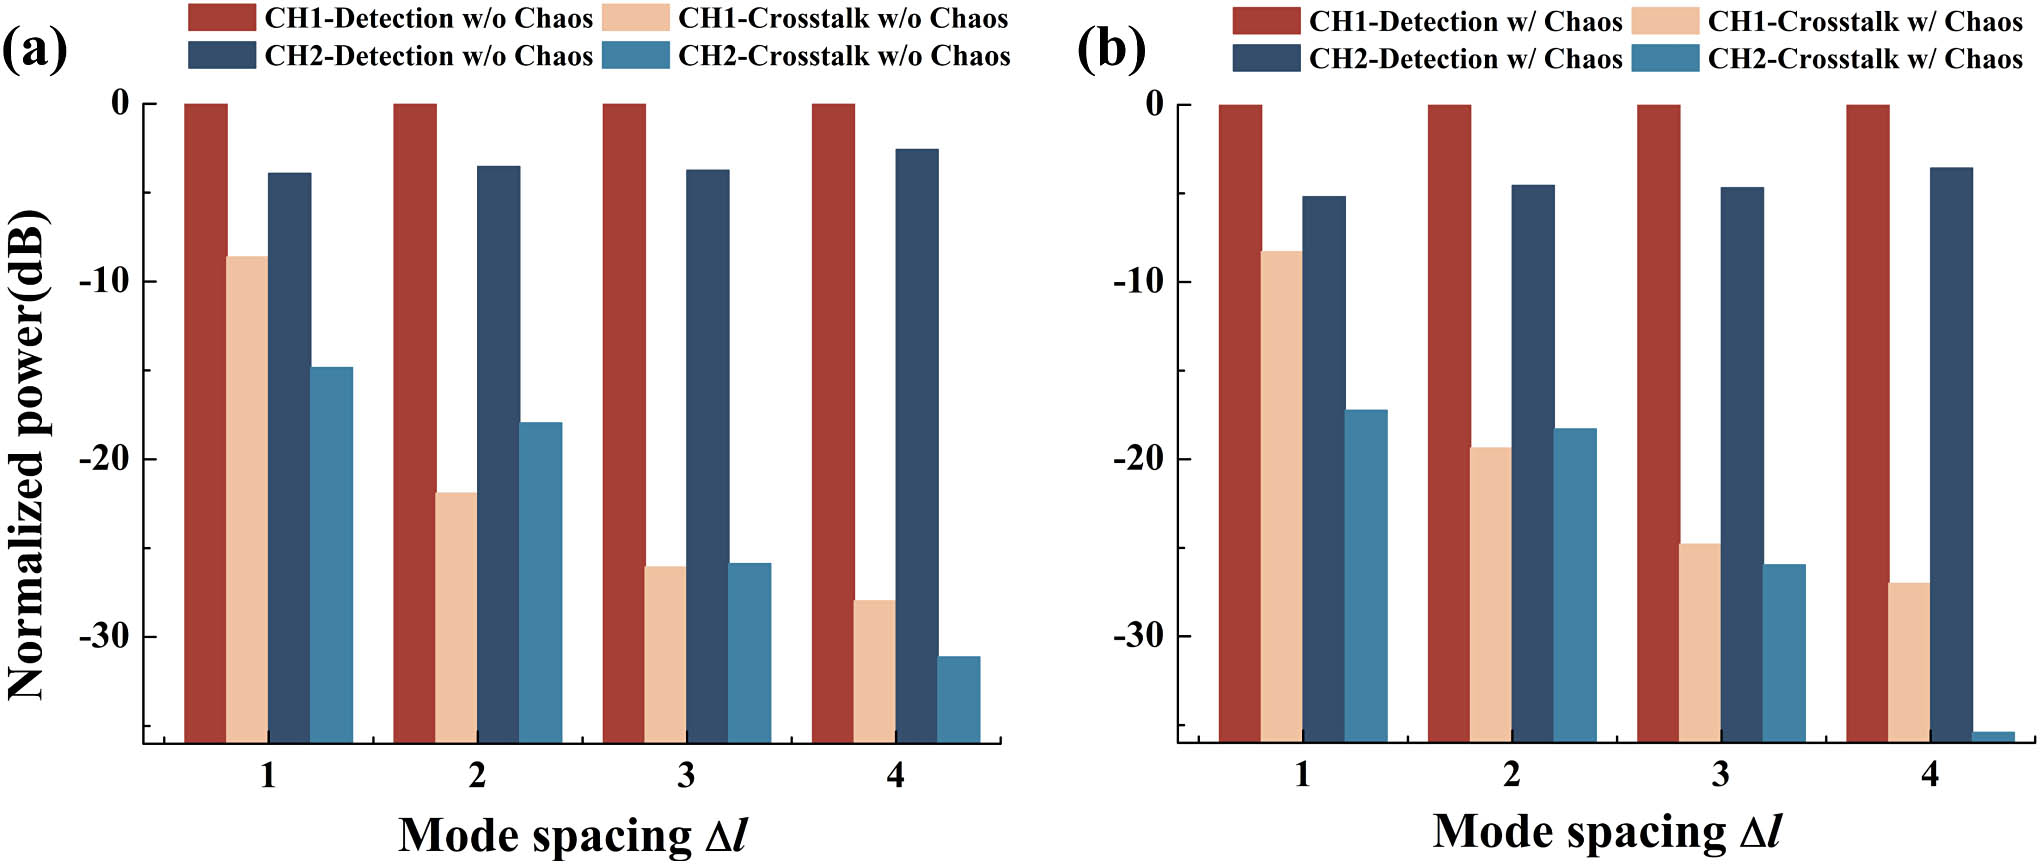 Measured channel crosstalk for the two OAM modes (a) without chaos feedback loop and (b) with chaos feedback loop. Take mode spacing Δl=1 as an example: CH1-Detection means CH1 sends OAM+2, while the inverse phase hologram OAM−2 is loaded on SLM3 for direct demodulation when CH2 is blocked. CH1-Crosstalk means the crosstalk from CH2 to CH1, that is, CH2 sends OAM+1, while OAM−2 is loaded on SLM3 when CH1 is blocked.